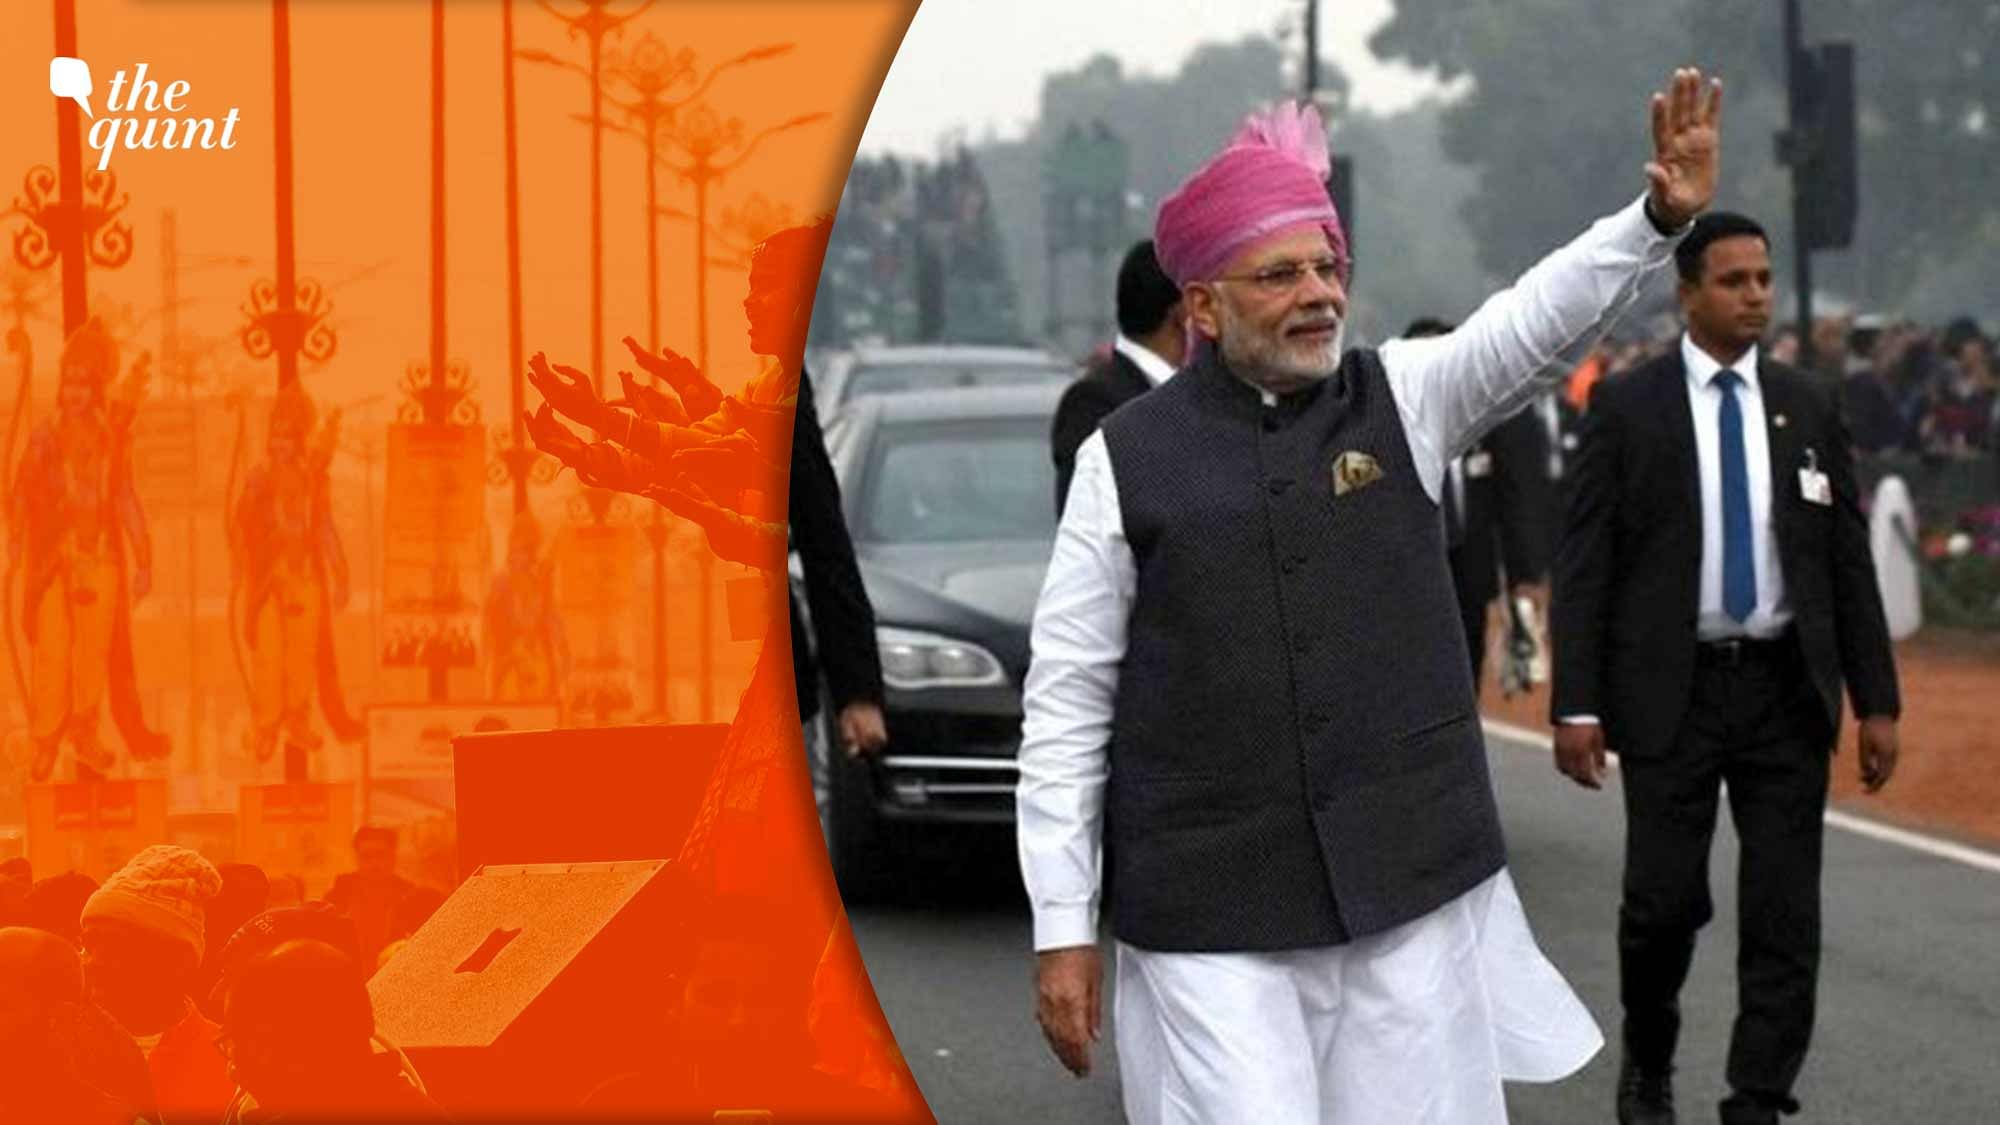 <div class="paragraphs"><p>"Elected autocracy" is a term used by some critics to describe Prime Minister<a href="https://www.thequint.com/opinion/ayodhya-ram-mandir-inauguration-ram-lalla-to-ram-rajya-modis-test-of-fire-in-modern-republic-2024-elections"> Narendra Modi</a>'s rule, but there is more to him than an authoritarian figure, though his imperious style is quite visible.</p></div>